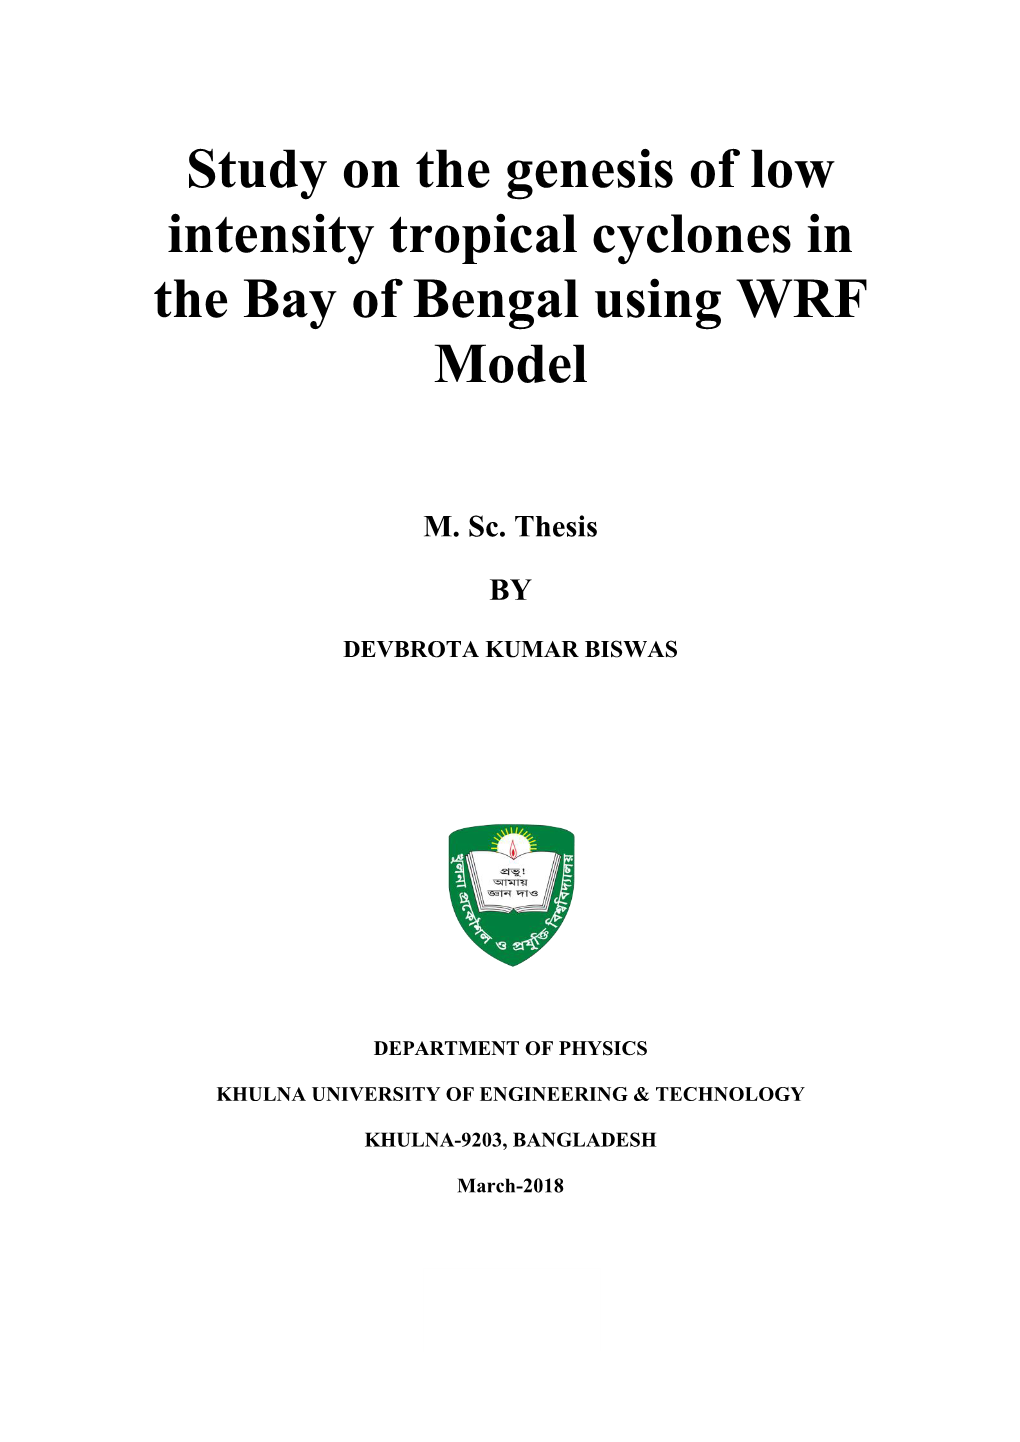 Study on the Genesis of Low Intensity Tropical Cyclones in the Bay of Bengal Using WRF Model